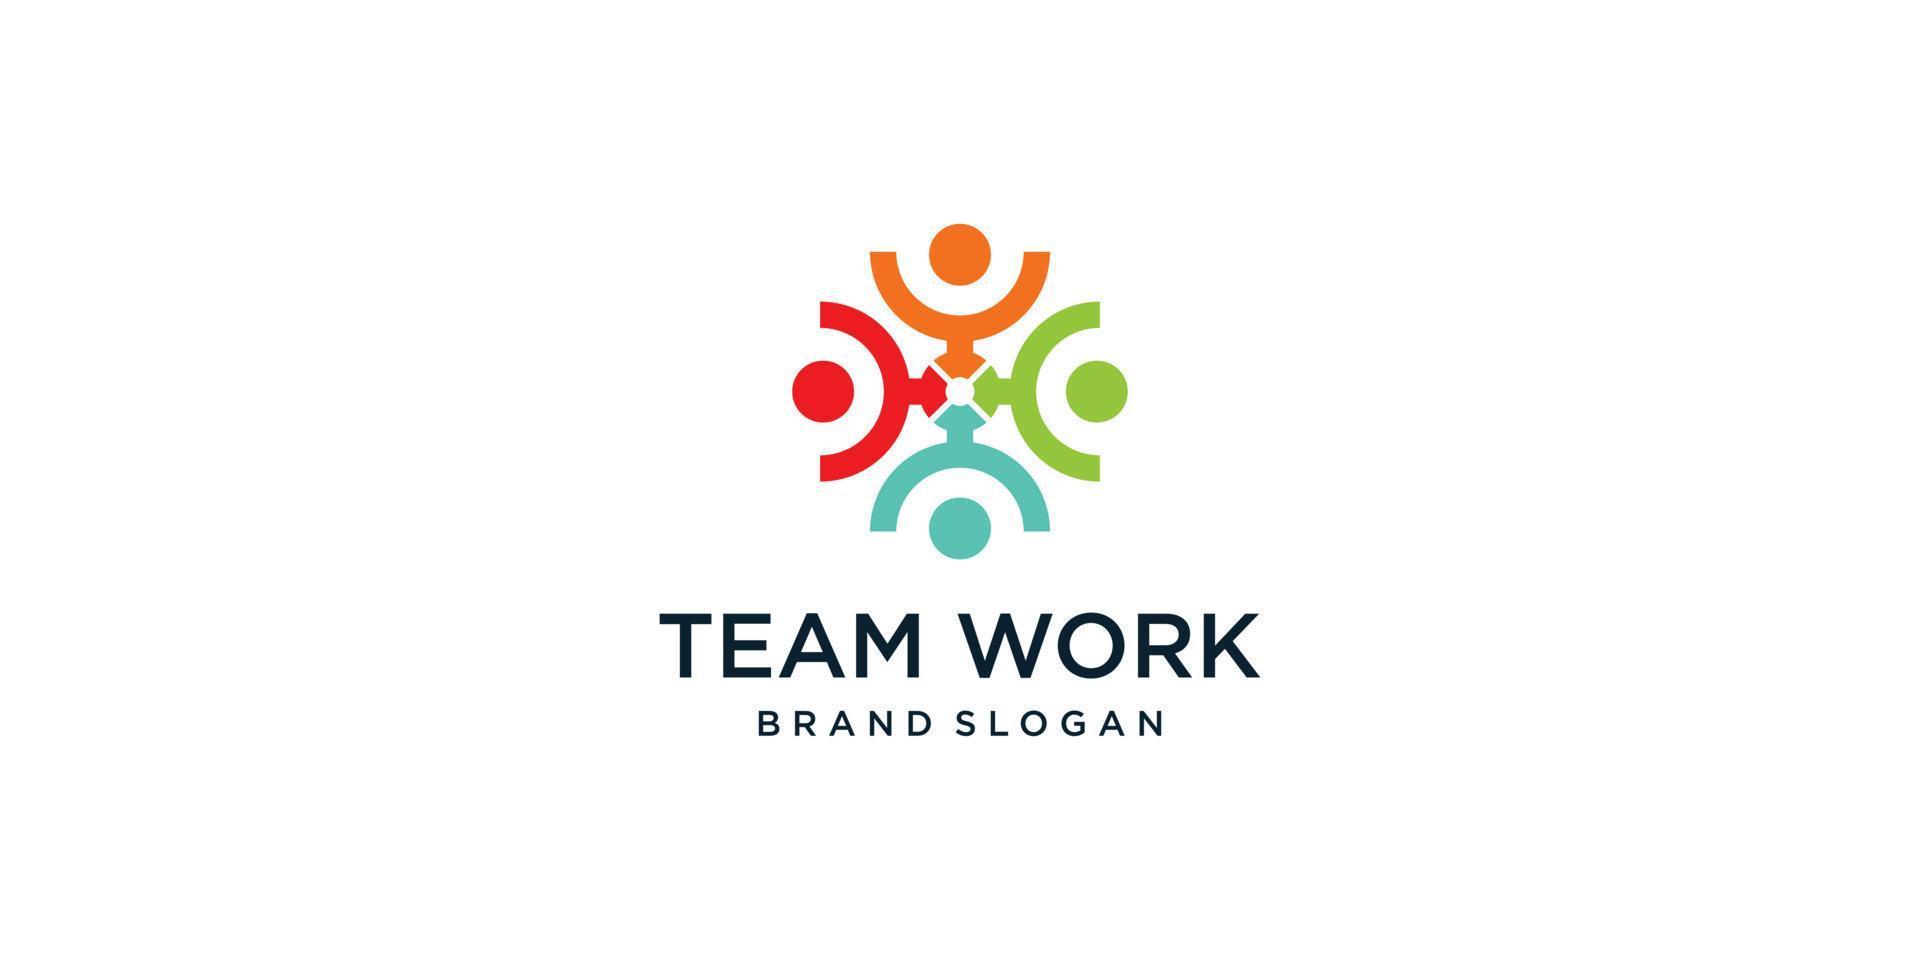 Community and team work logo abstract Premium Vector part 3